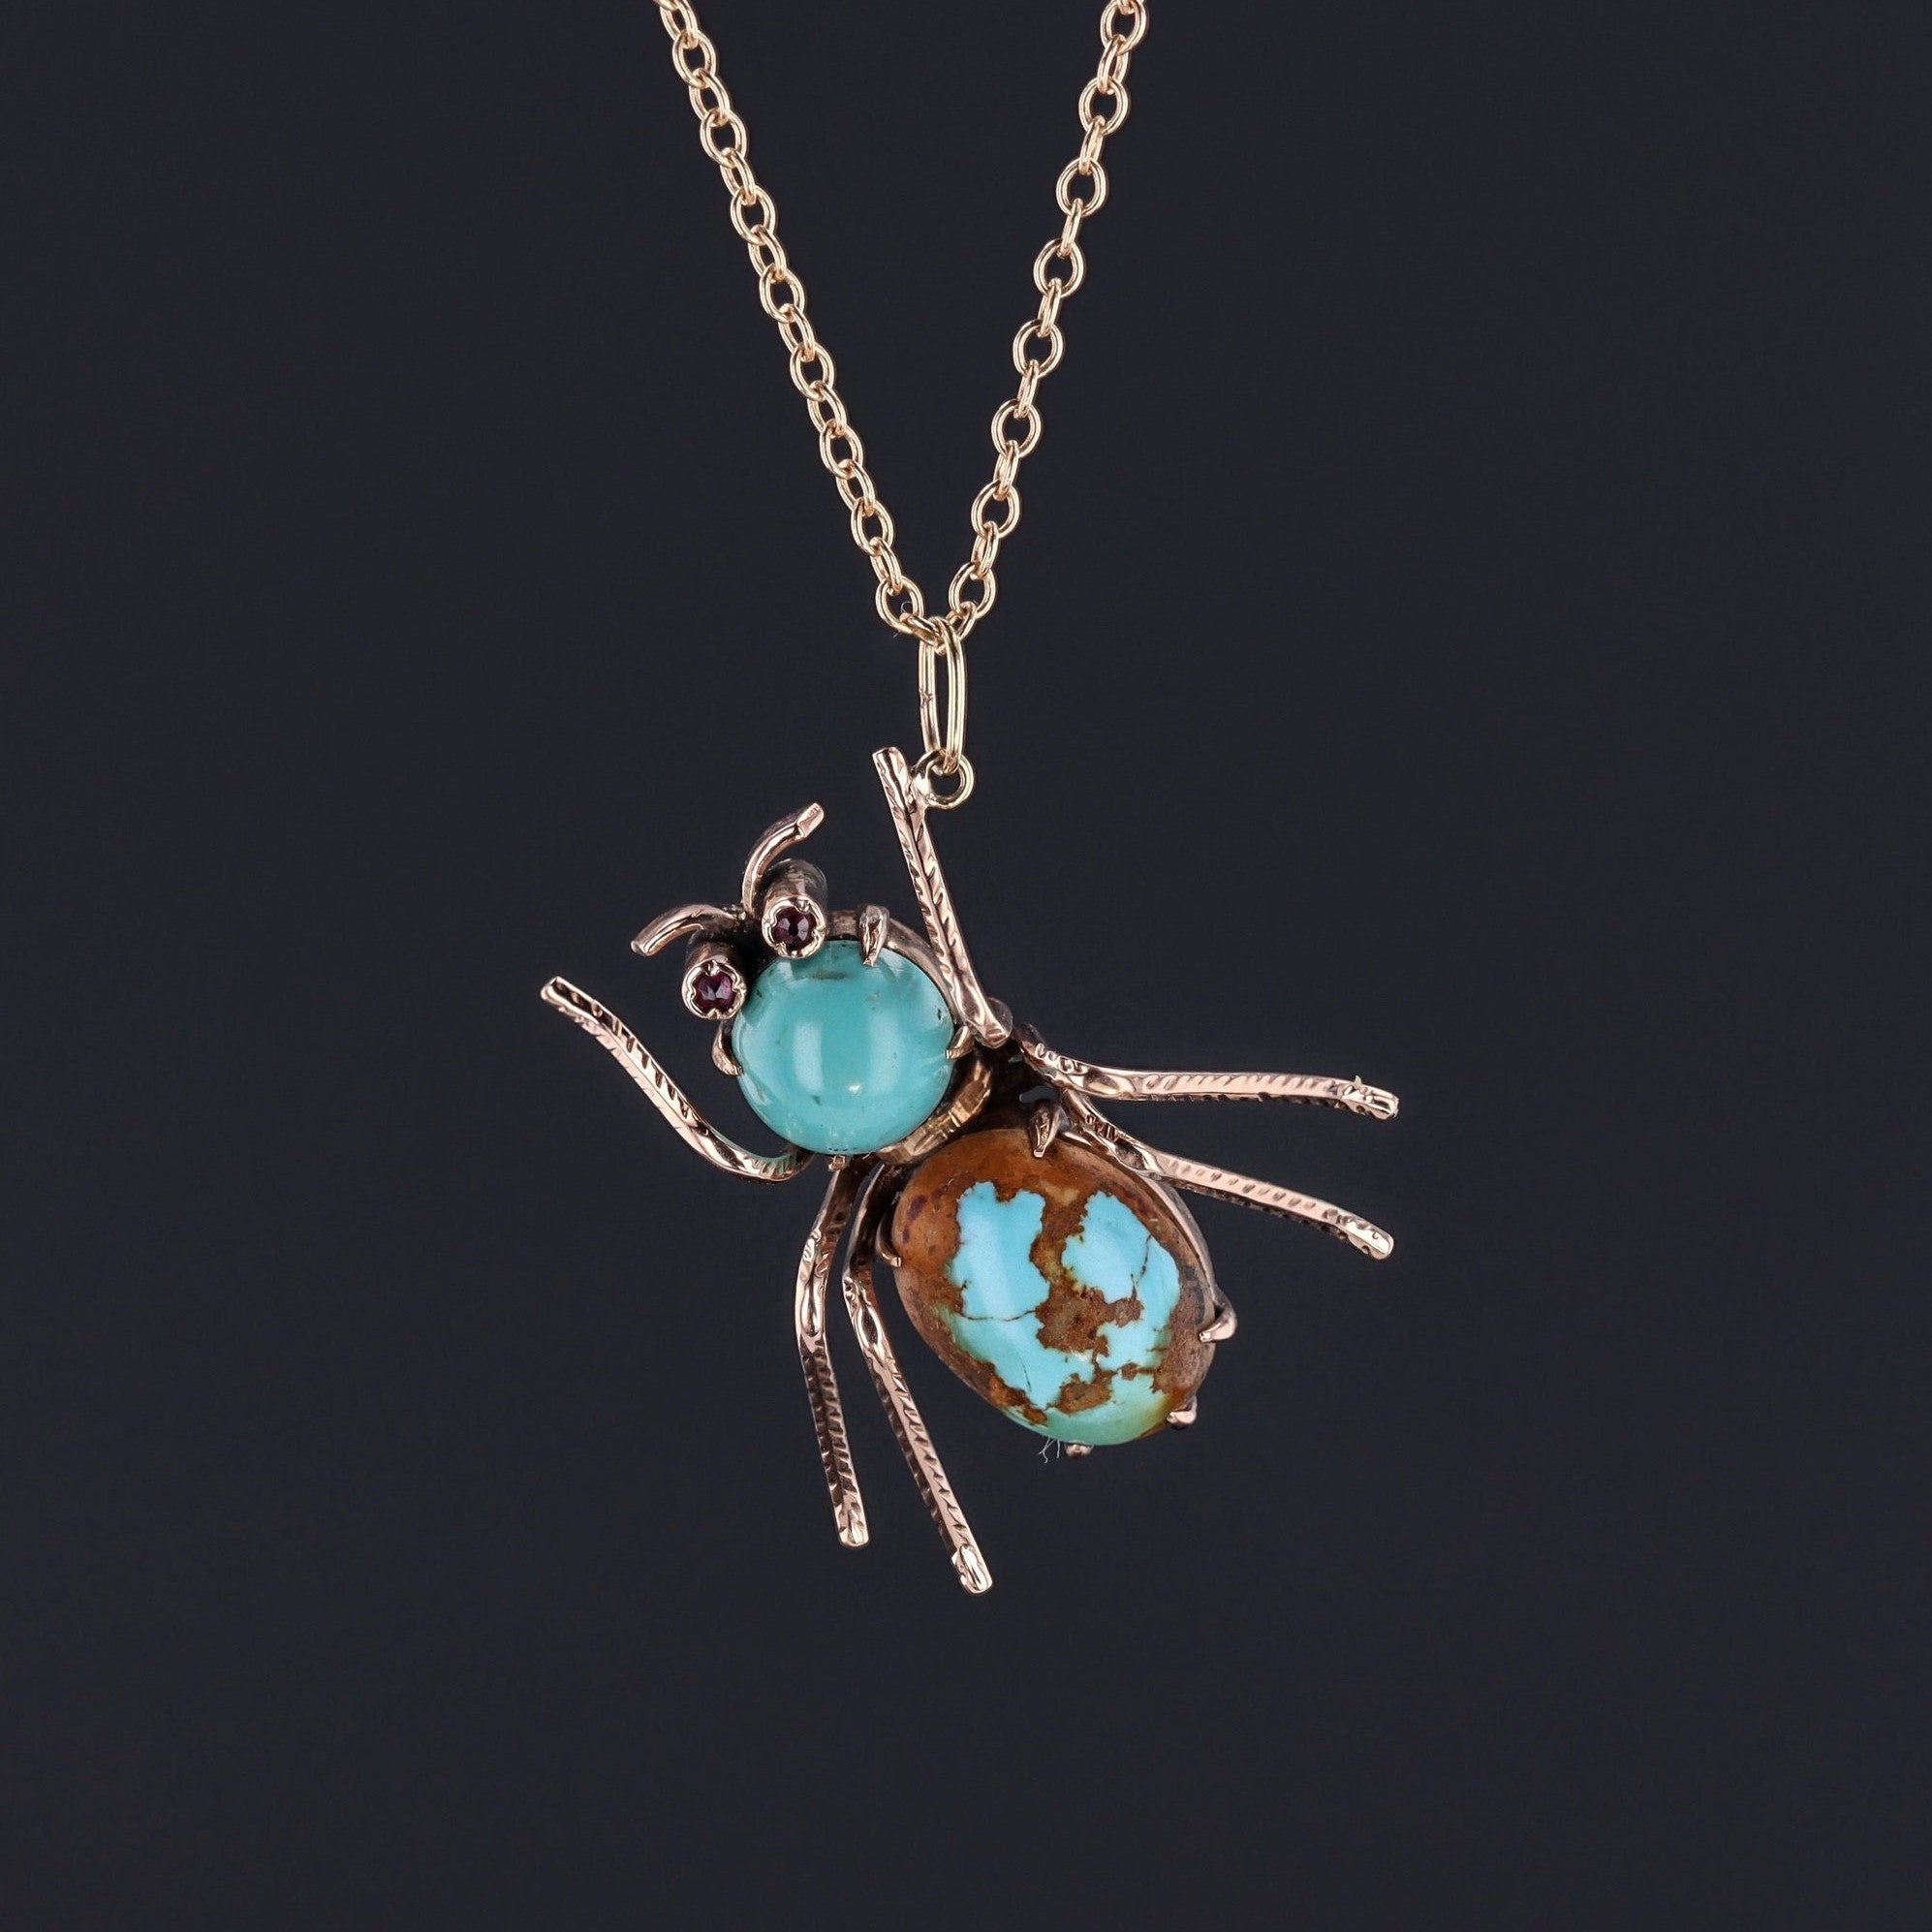 Vintage Turquoise Insect Conversion Pendant of 14k Gold